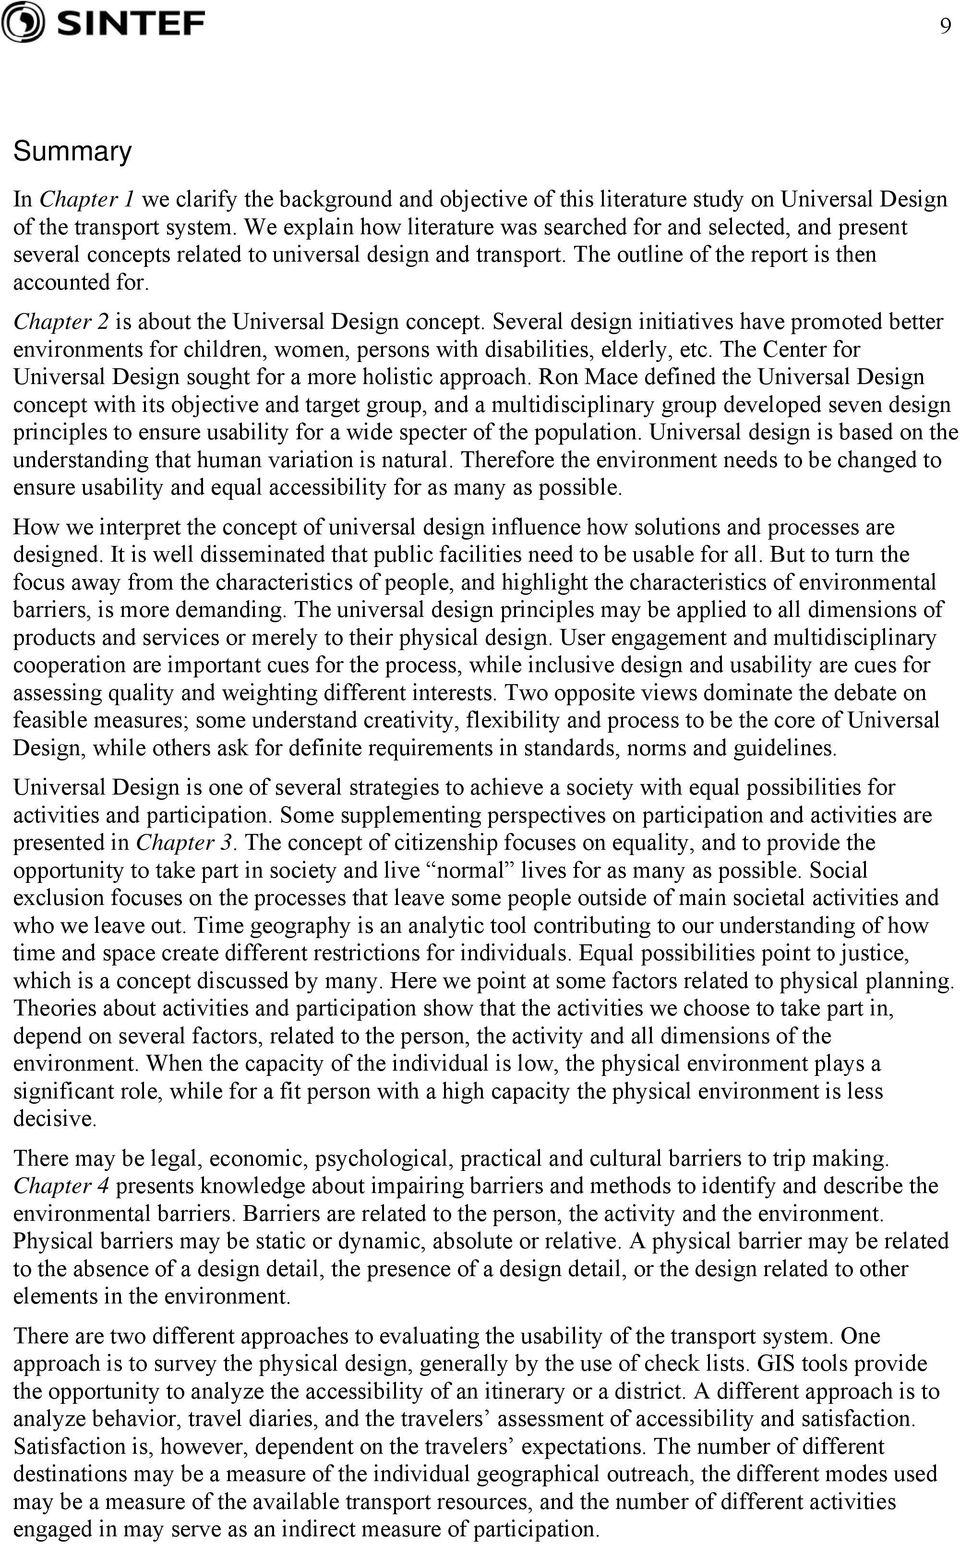 Chapter 2 is about the Universal Design concept. Several design initiatives have promoted better environments for children, women, persons with disabilities, elderly, etc.